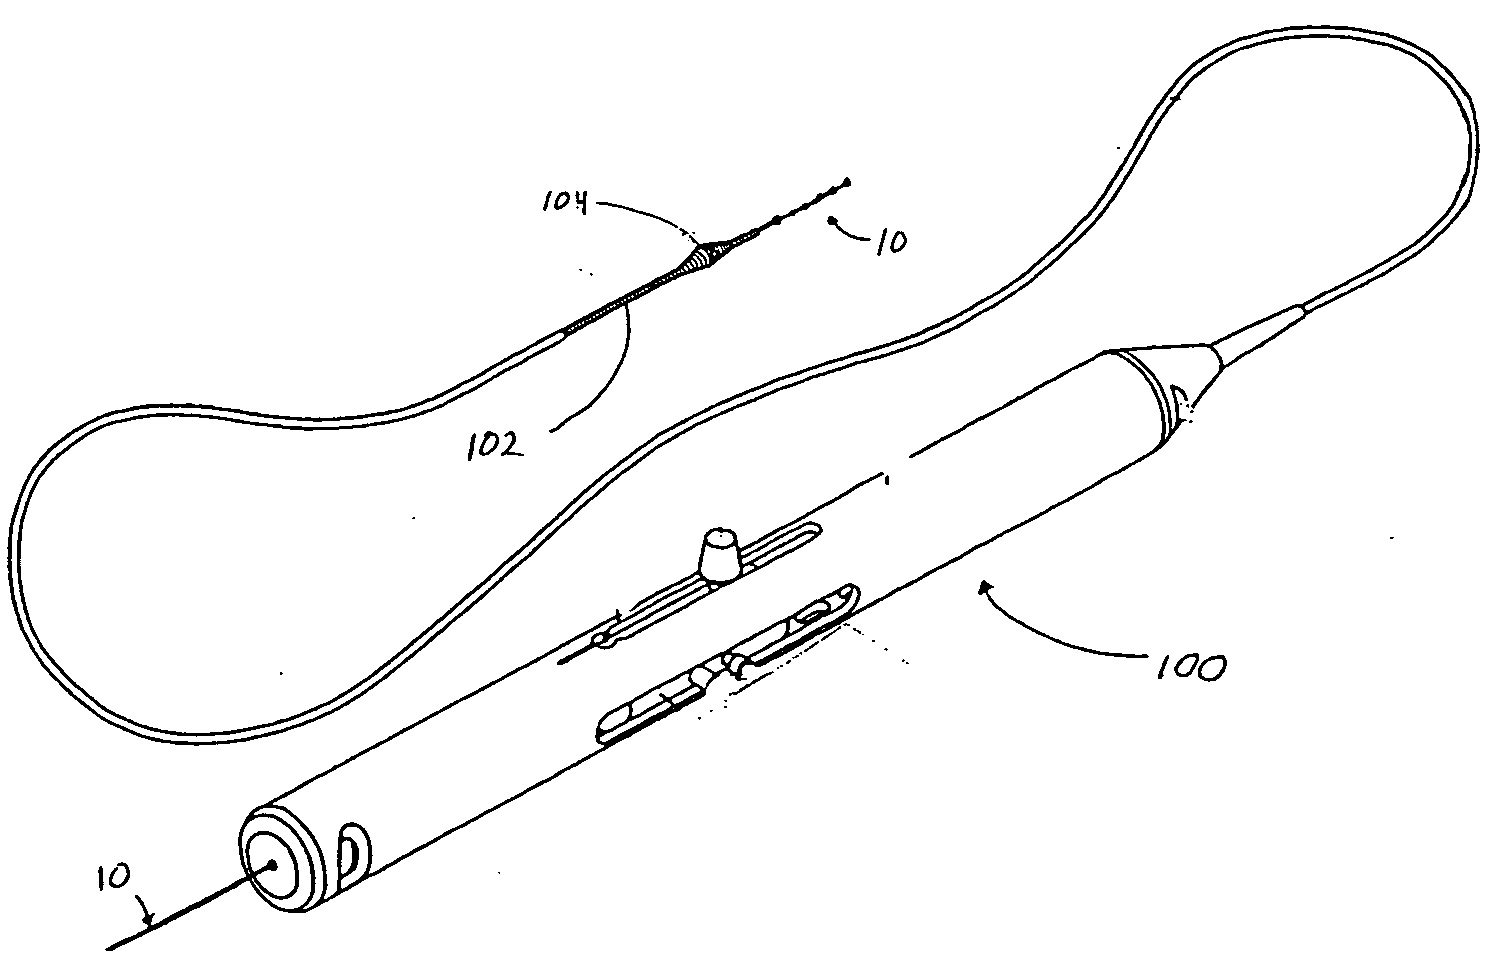 Orbital atherectomy device guide wire design